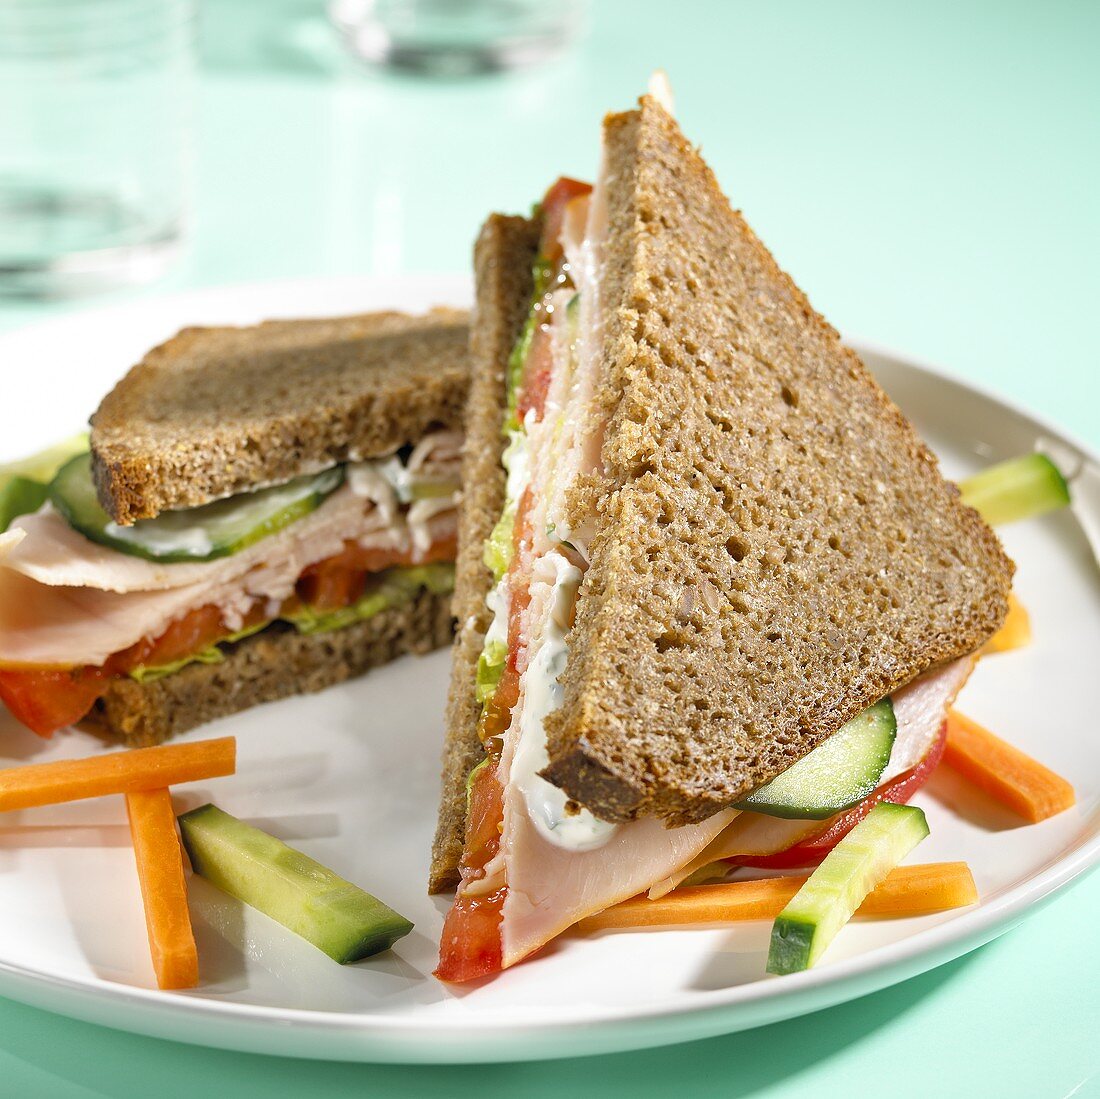 Wholemeal sandwich with turkey breast and vegetables